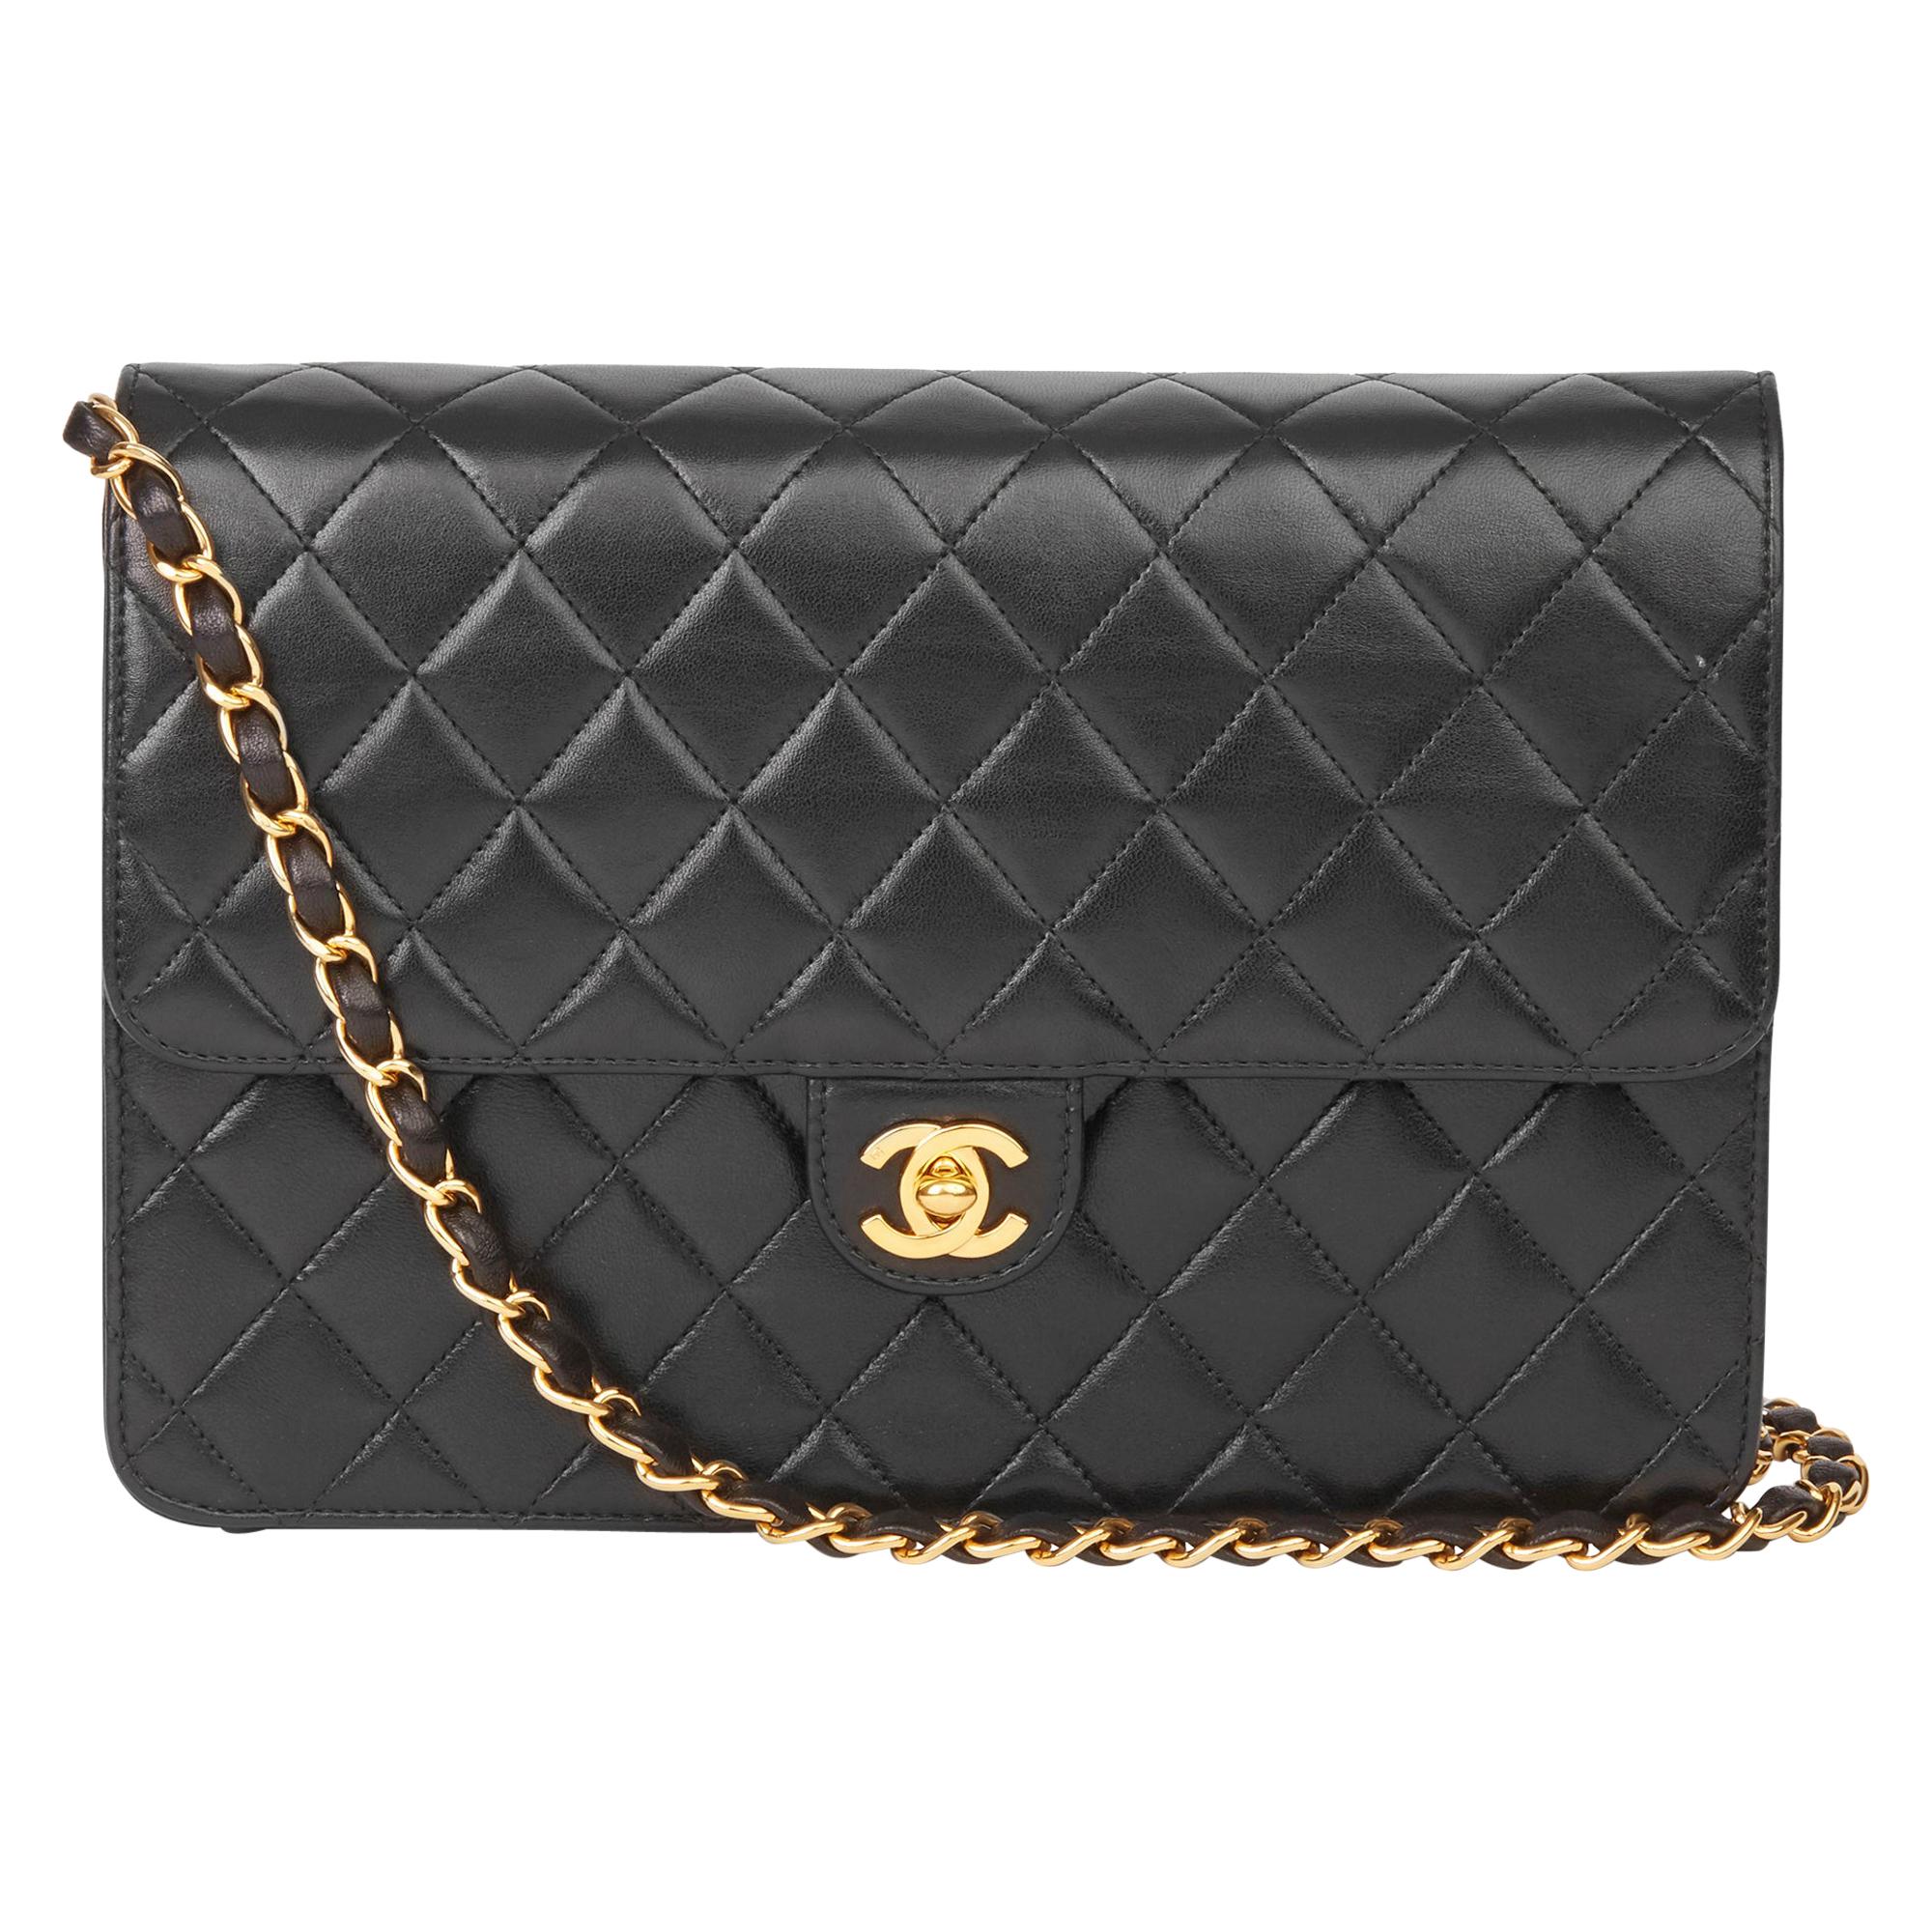 2002 Chanel Black Quilted Lambskin Small Classic Single Flap Bag